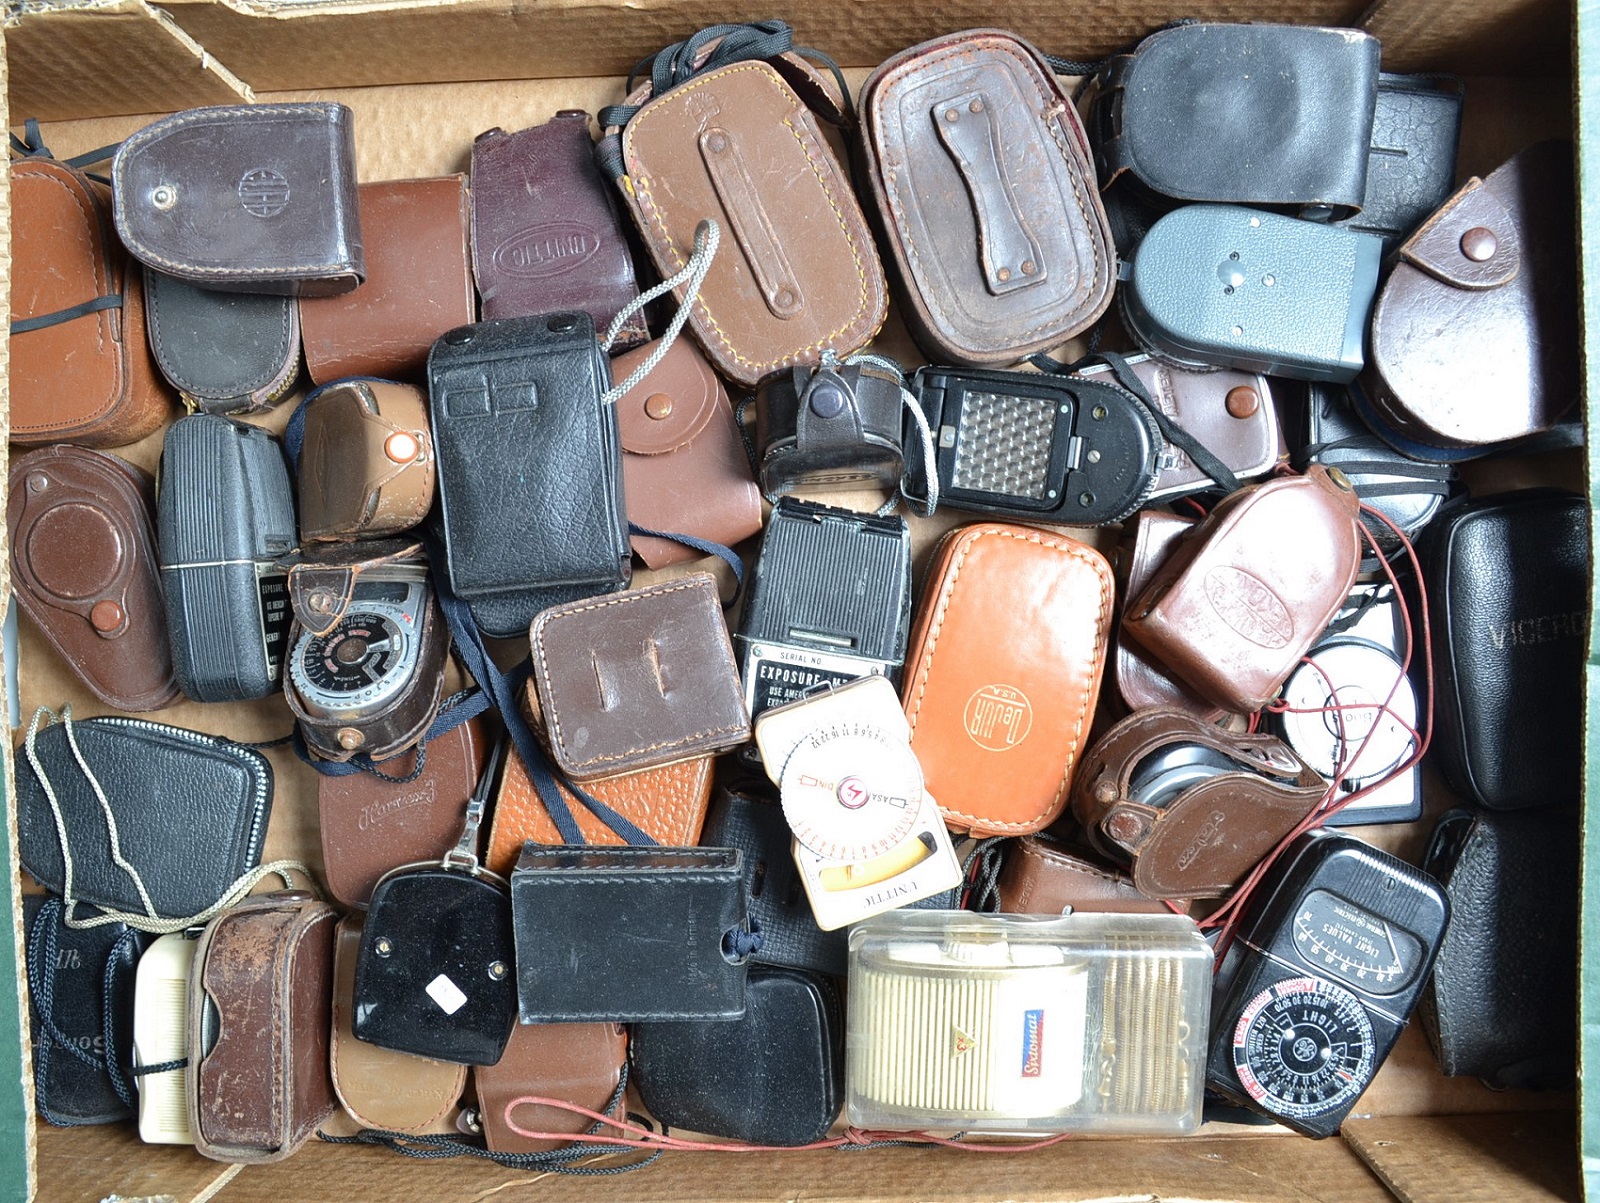 A Tray of Light Meters, manufacturers including General Electric, Sixtomat, Sekonic, many other